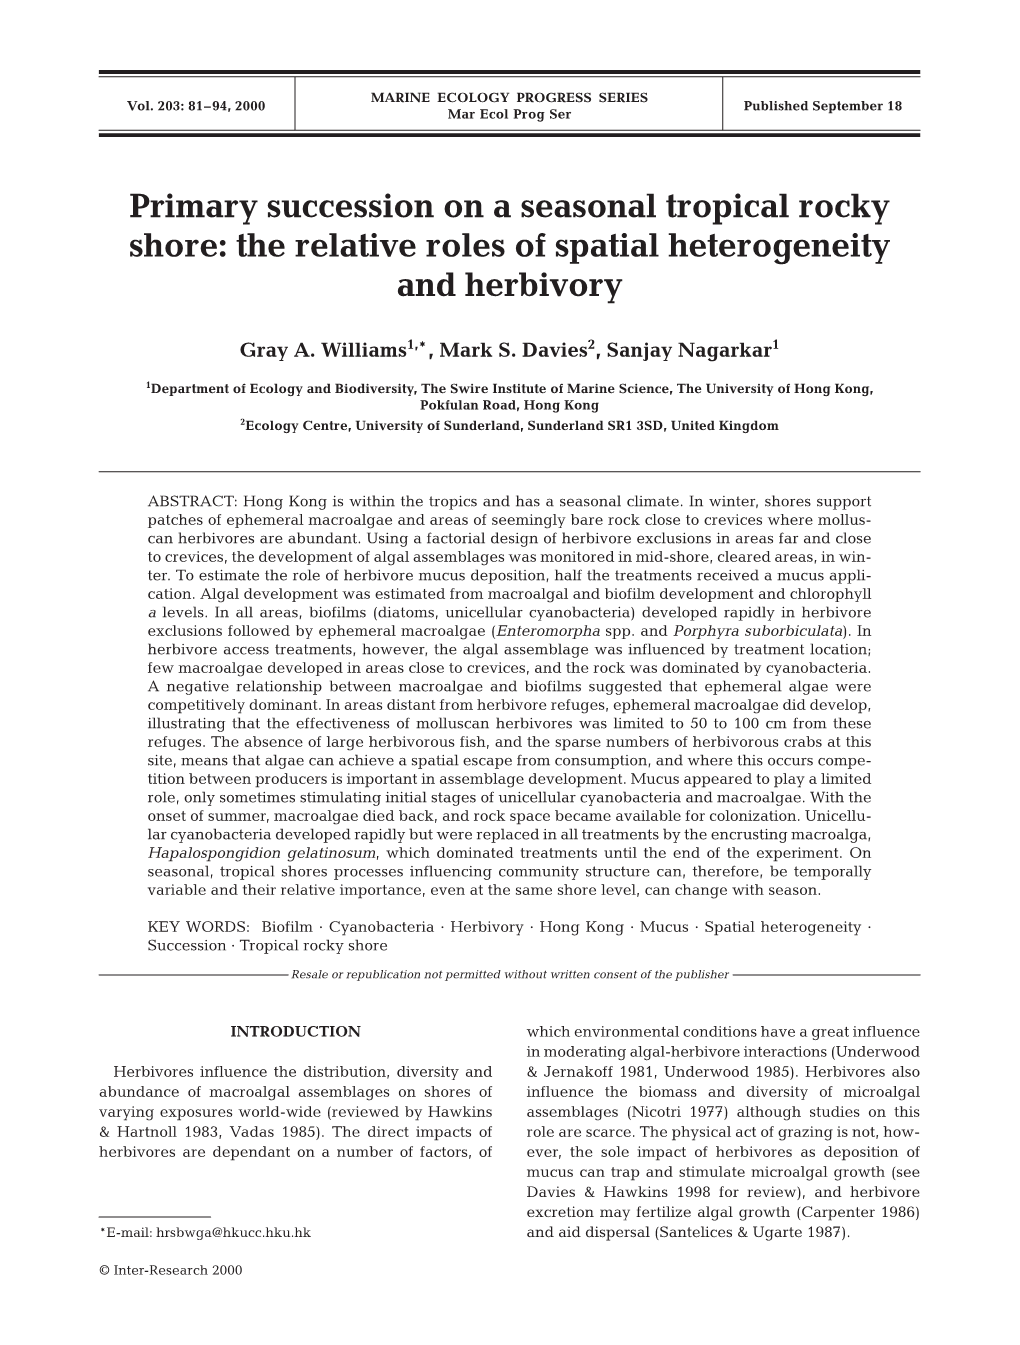 Primary Succession on a Seasonal Tropical Rocky Shore: the Relative Roles of Spatial Heterogeneity and Herbivory